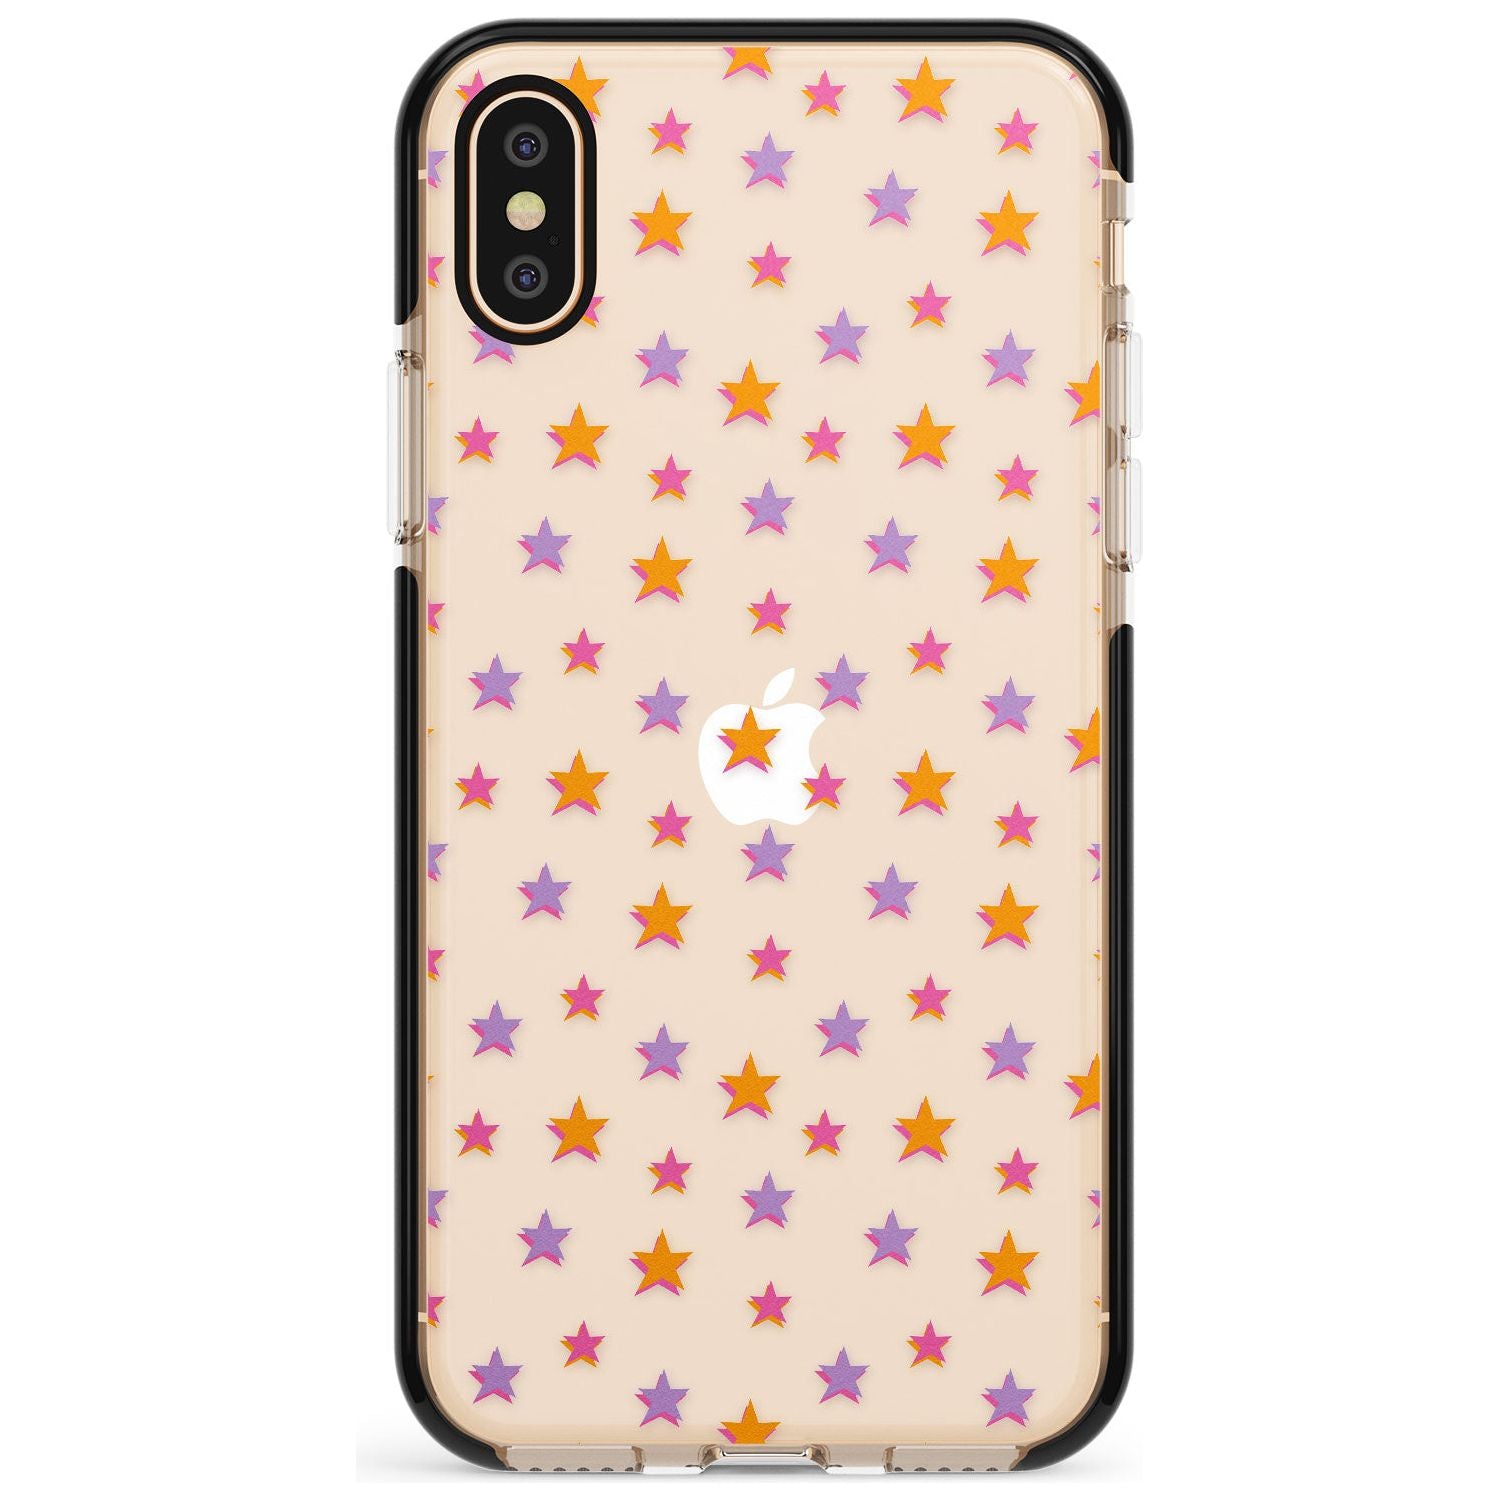 Spangling Stars Pattern Black Impact Phone Case for iPhone X XS Max XR